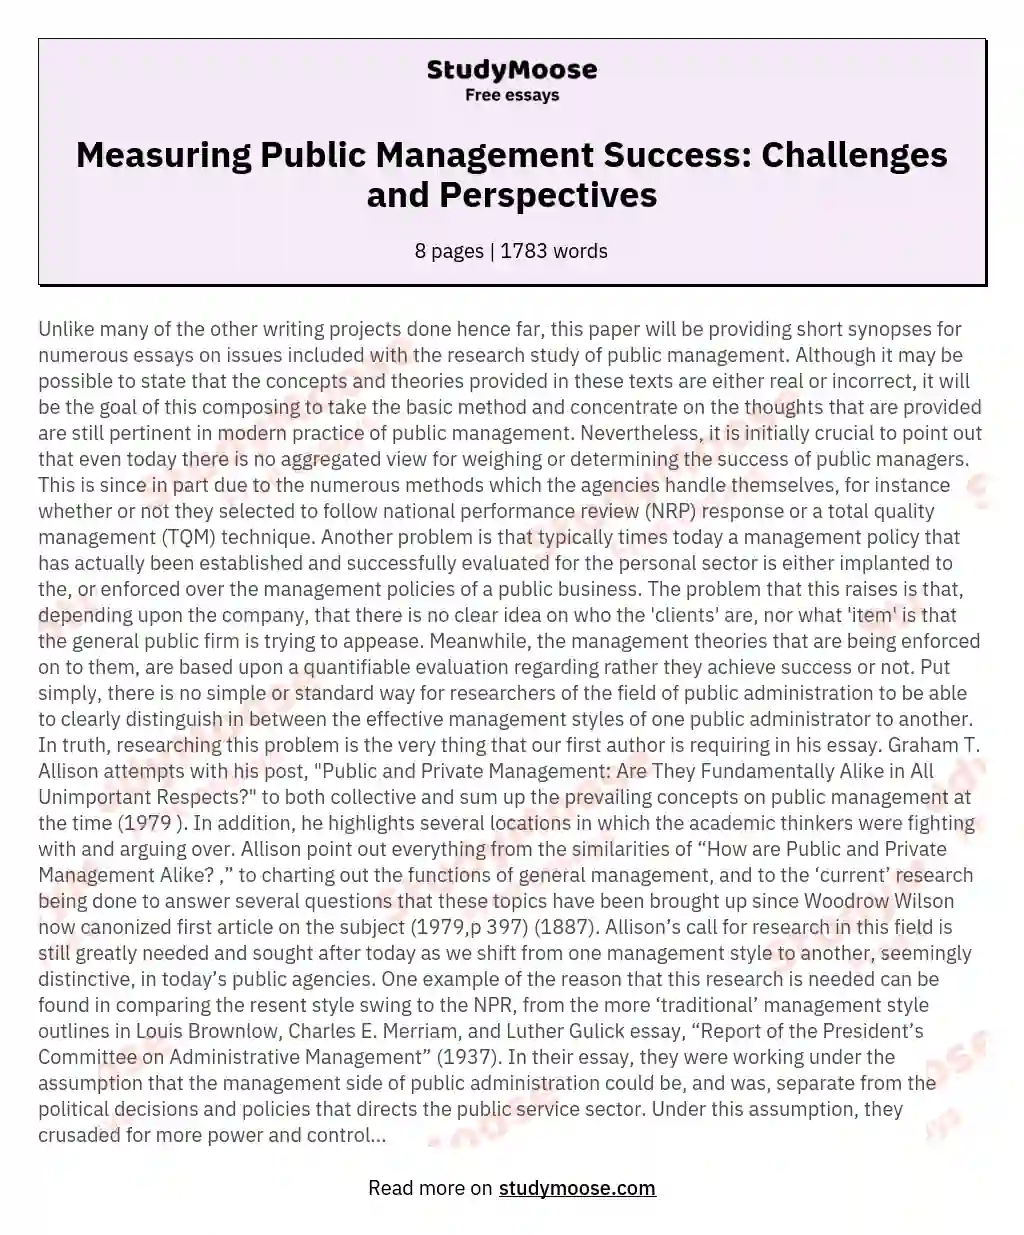 Measuring Public Management Success: Challenges and Perspectives essay